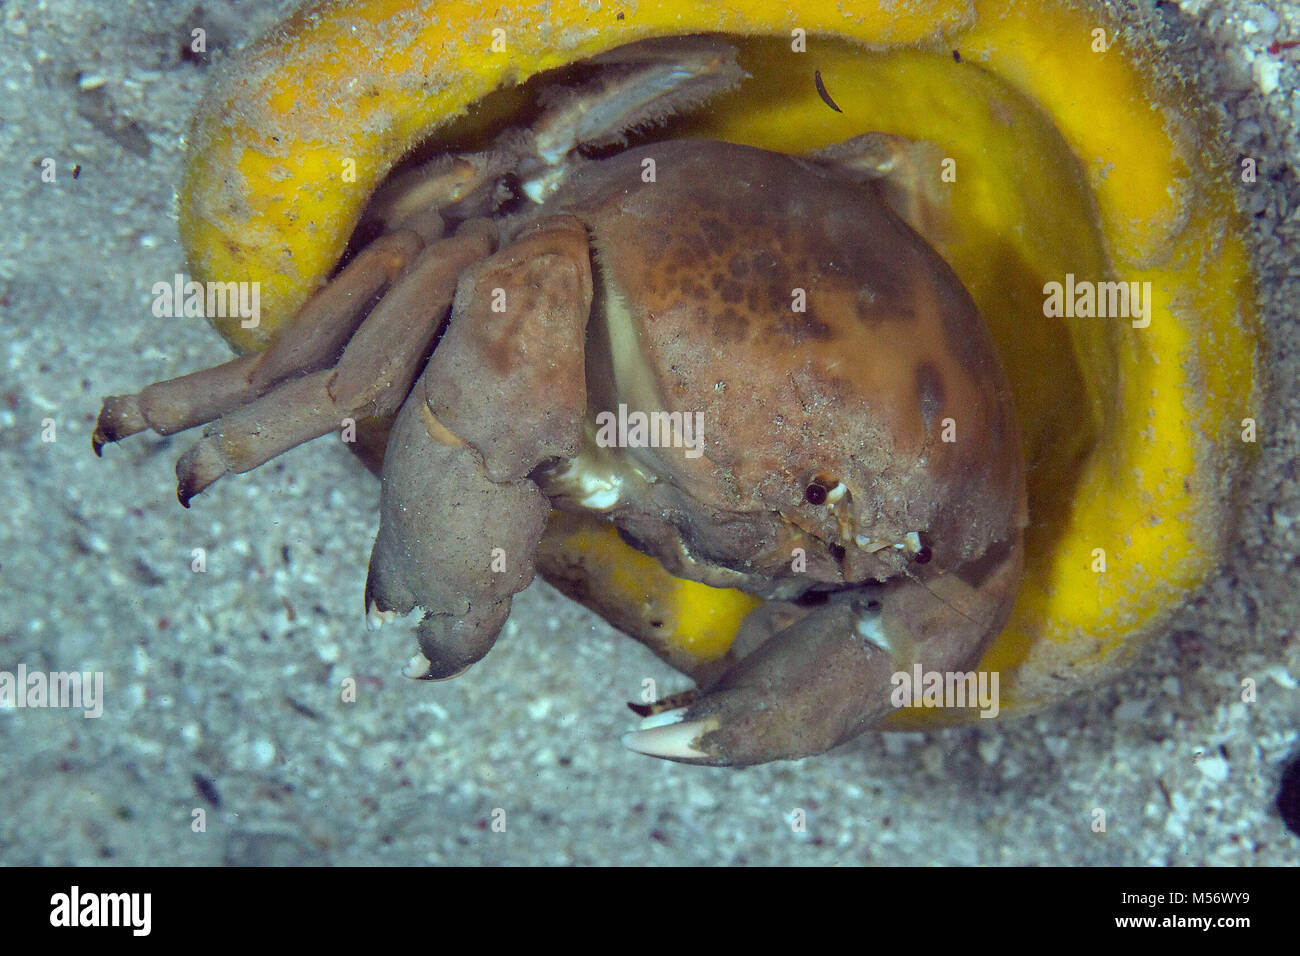 Hermit Crab In Yellow Vase Sponge, St Photograph by Turner Forte - Pixels